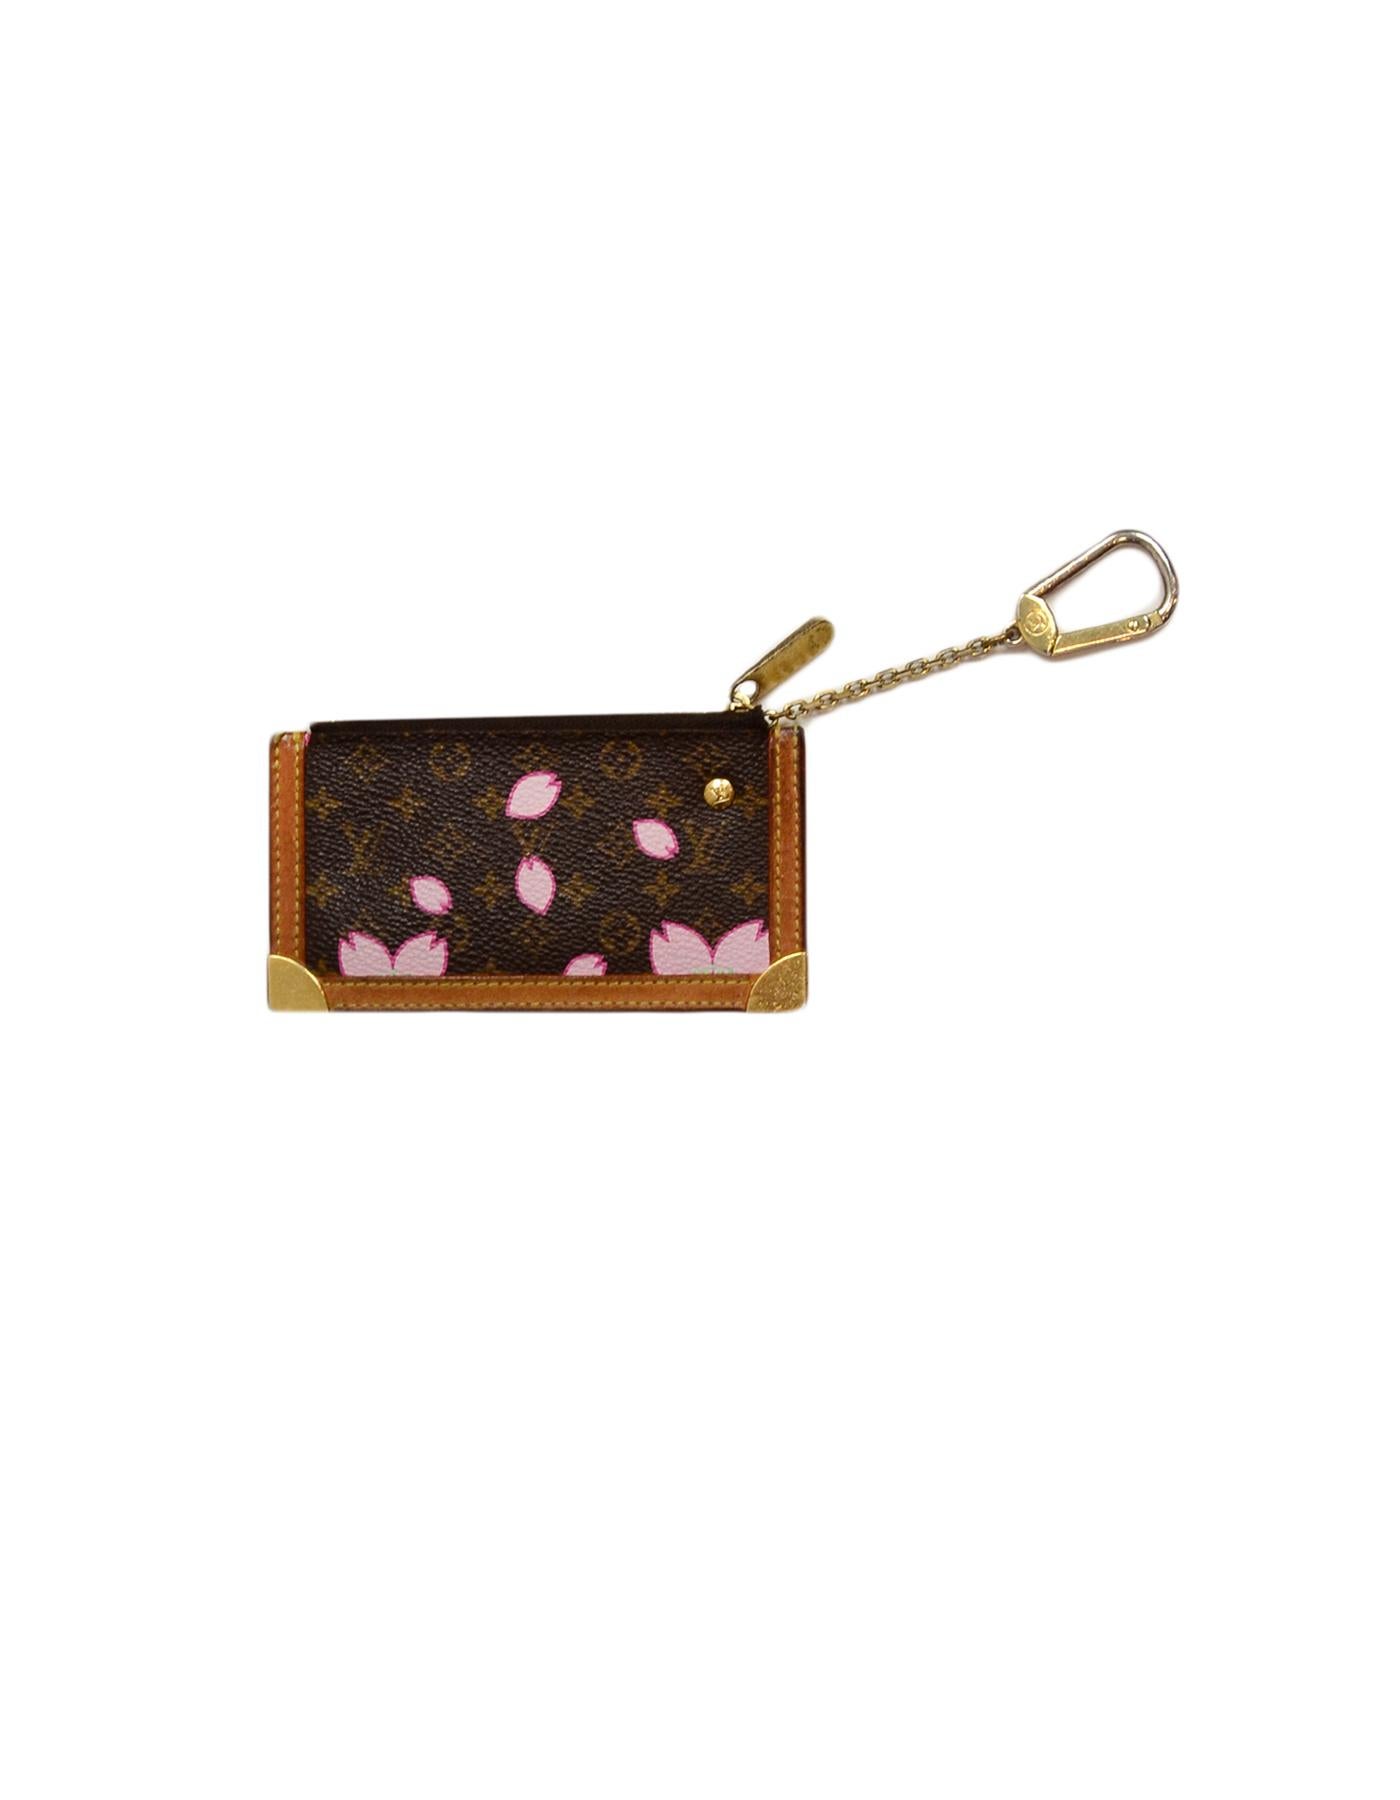 Louis Vuitton Edition Monogram Cherry Blossom Key Pouch/Coin Purse

Made In: Spain
Year of Production: 2003
Color: Brown
Hardware: Goldtone
Materials: Monogram
Lining: Leather
Closure/Opening: Top zip
Exterior Pockets: None
Interior Pockets: